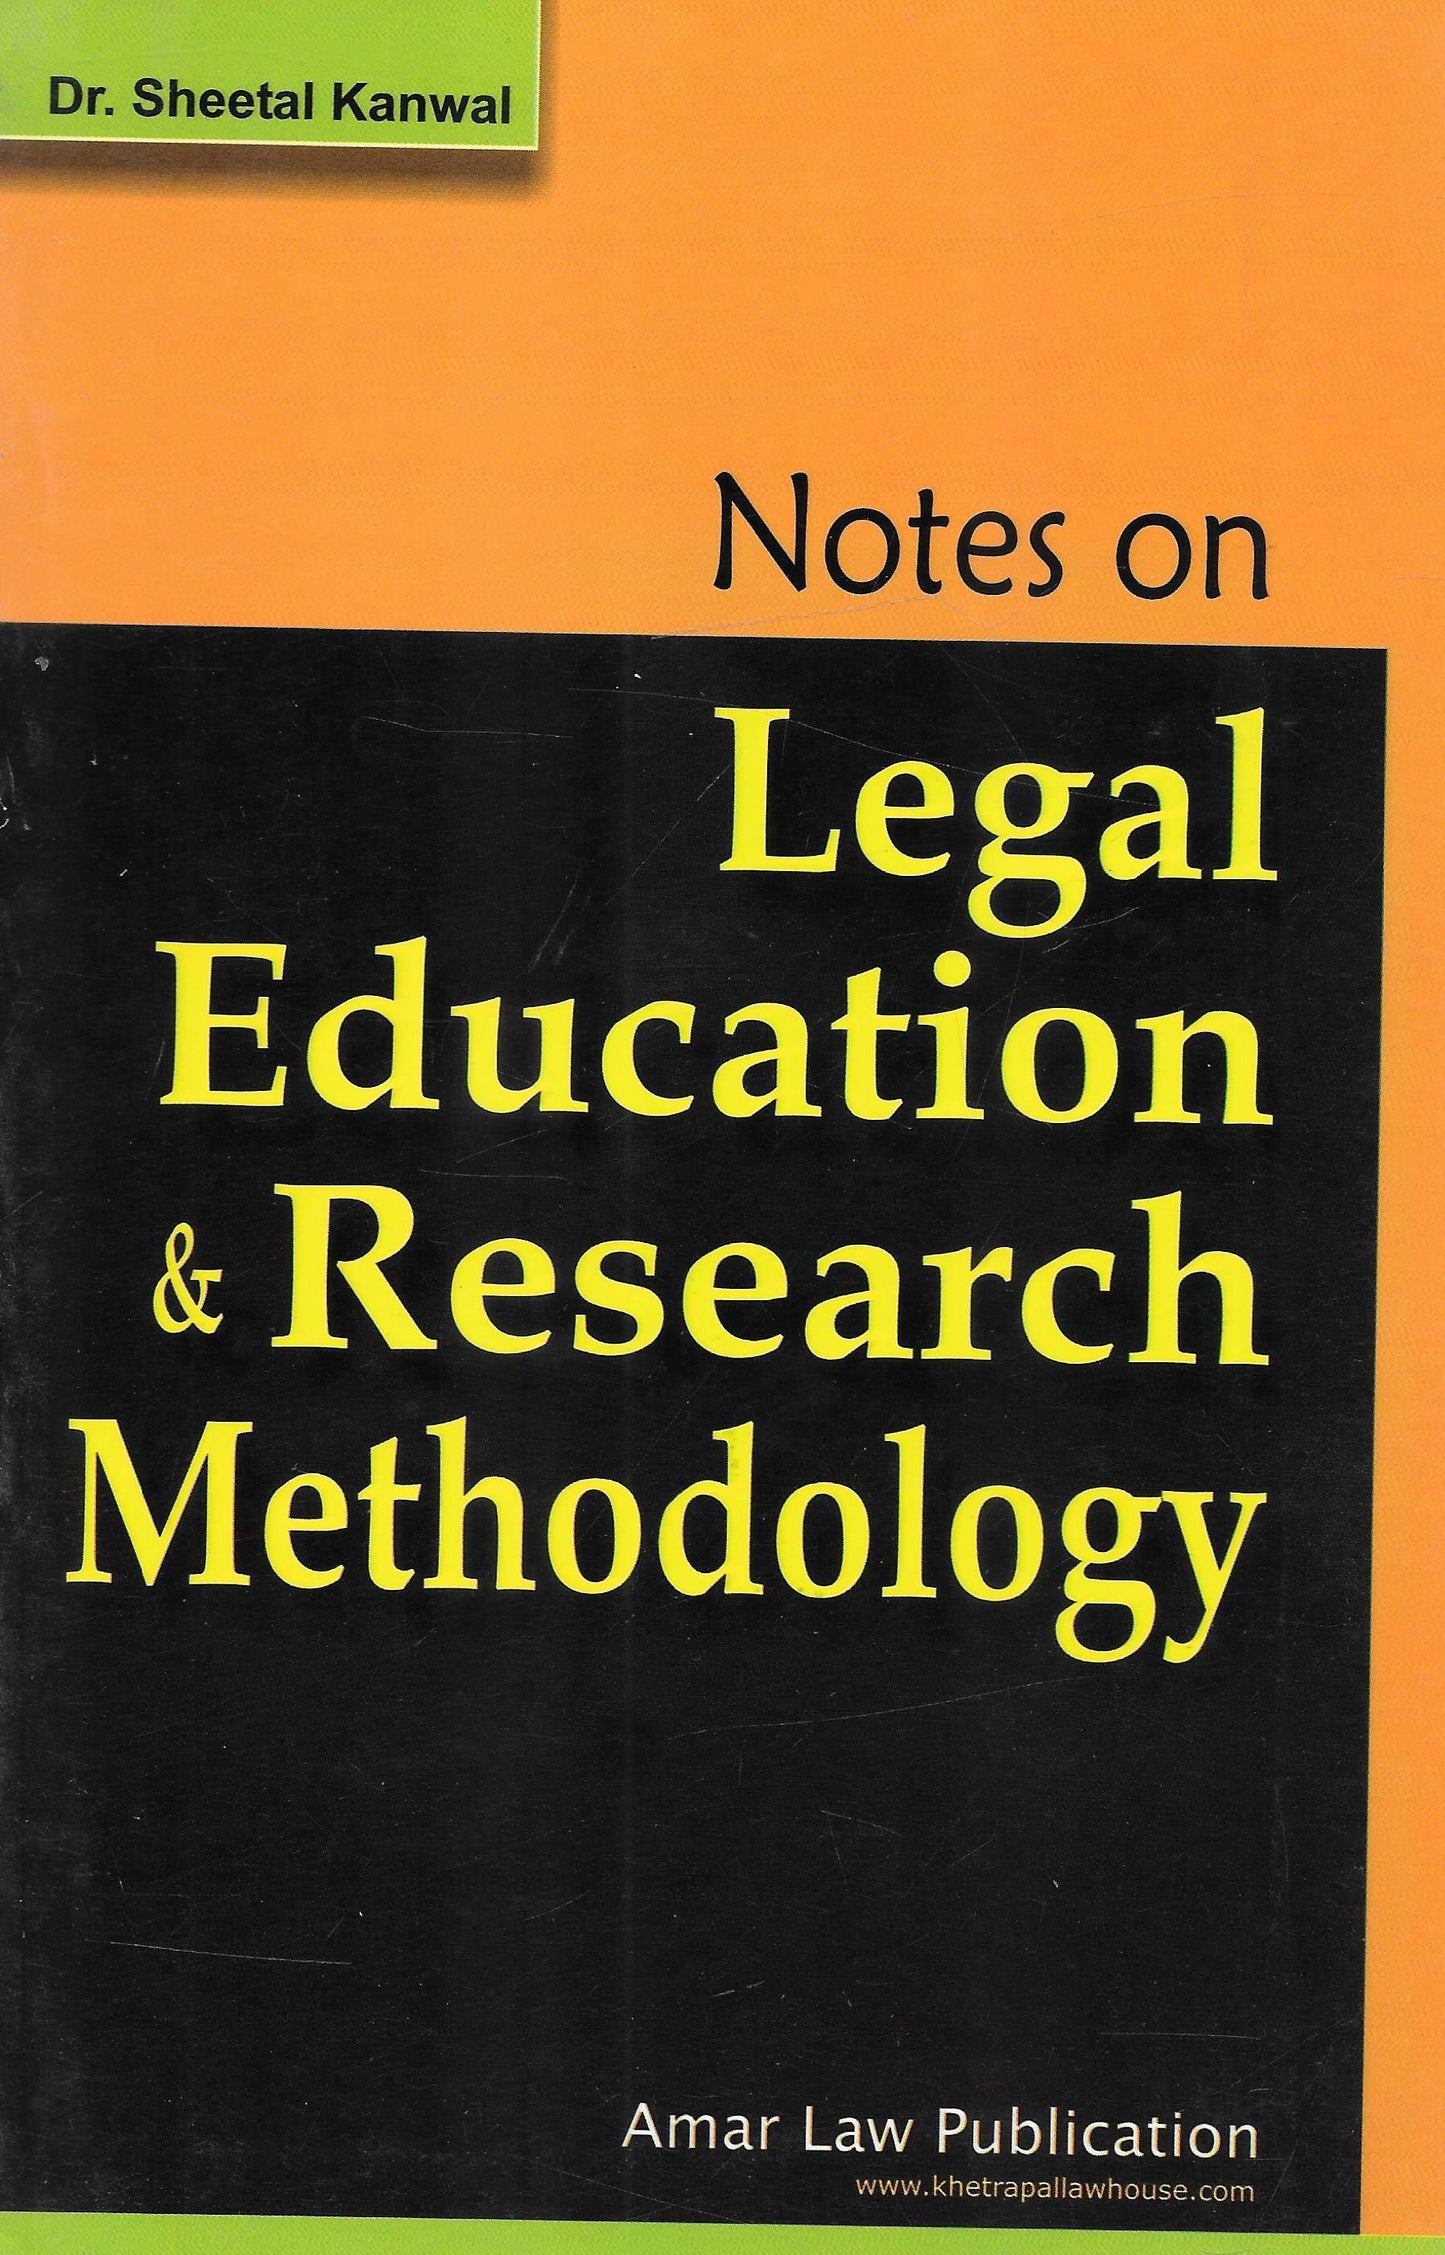 Notes on Legal Education and Research Methodology (LLM Exam Book)